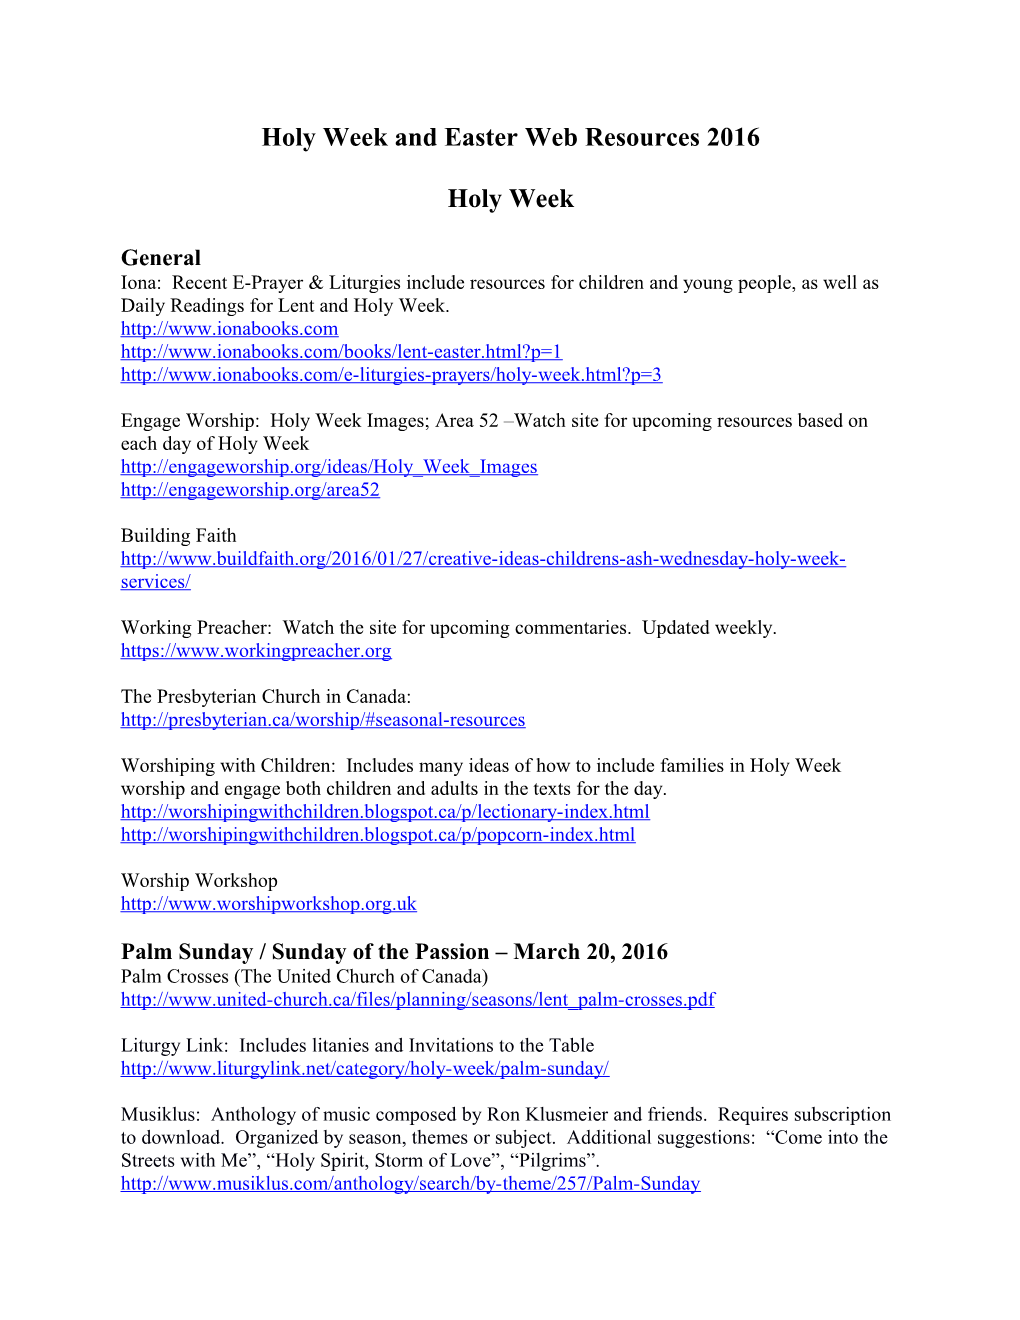 Holy Week and Easter Web Resources 2016